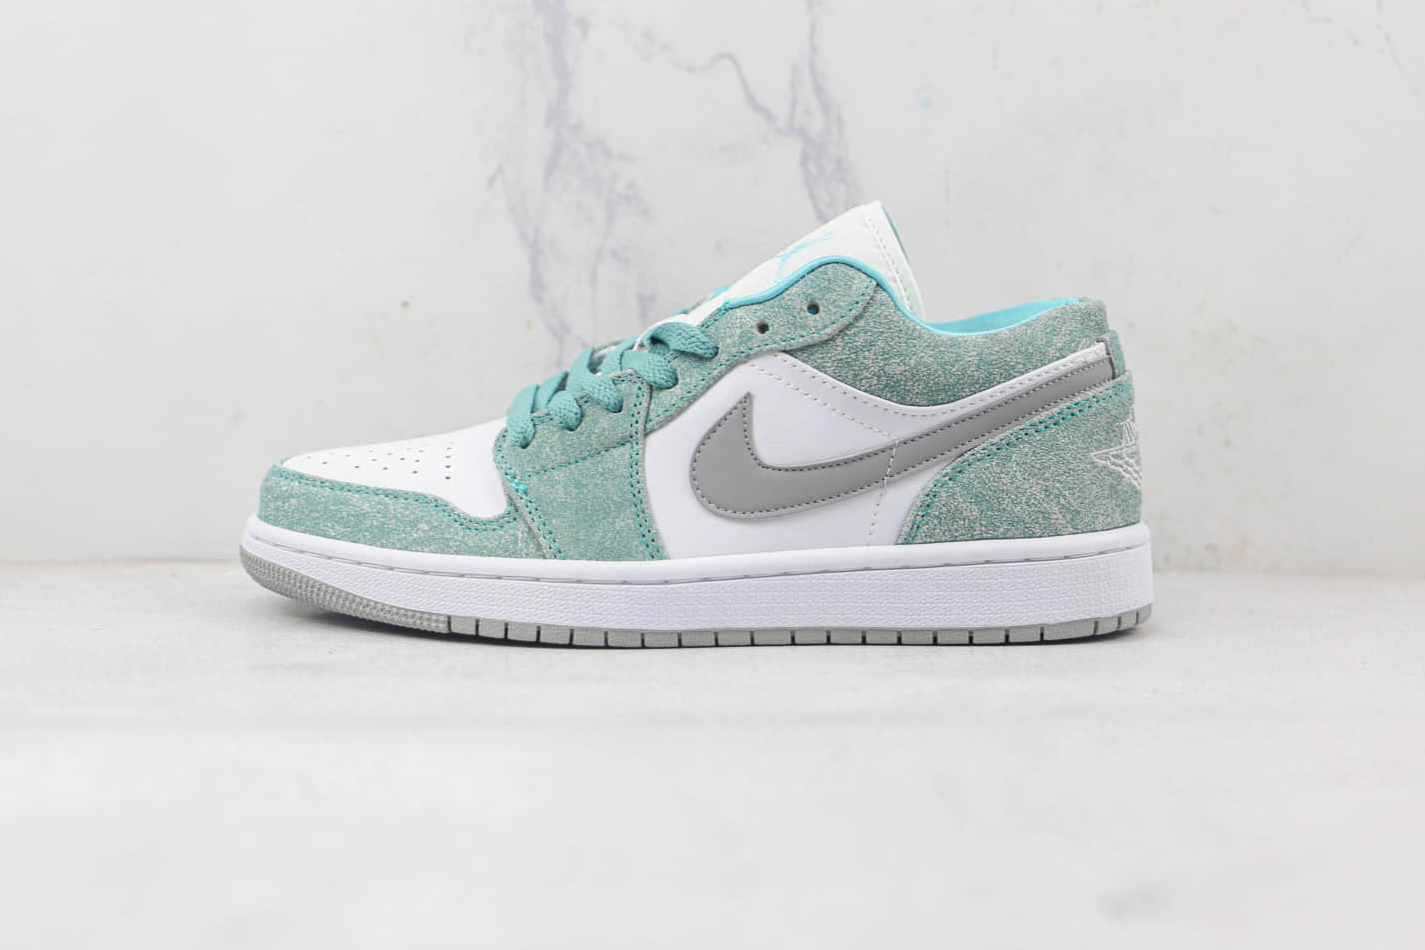 Air Jordan 1 Low 'New Emerald' DN3705-301 - Sleek and Stylish Suede for an Iconic Look!